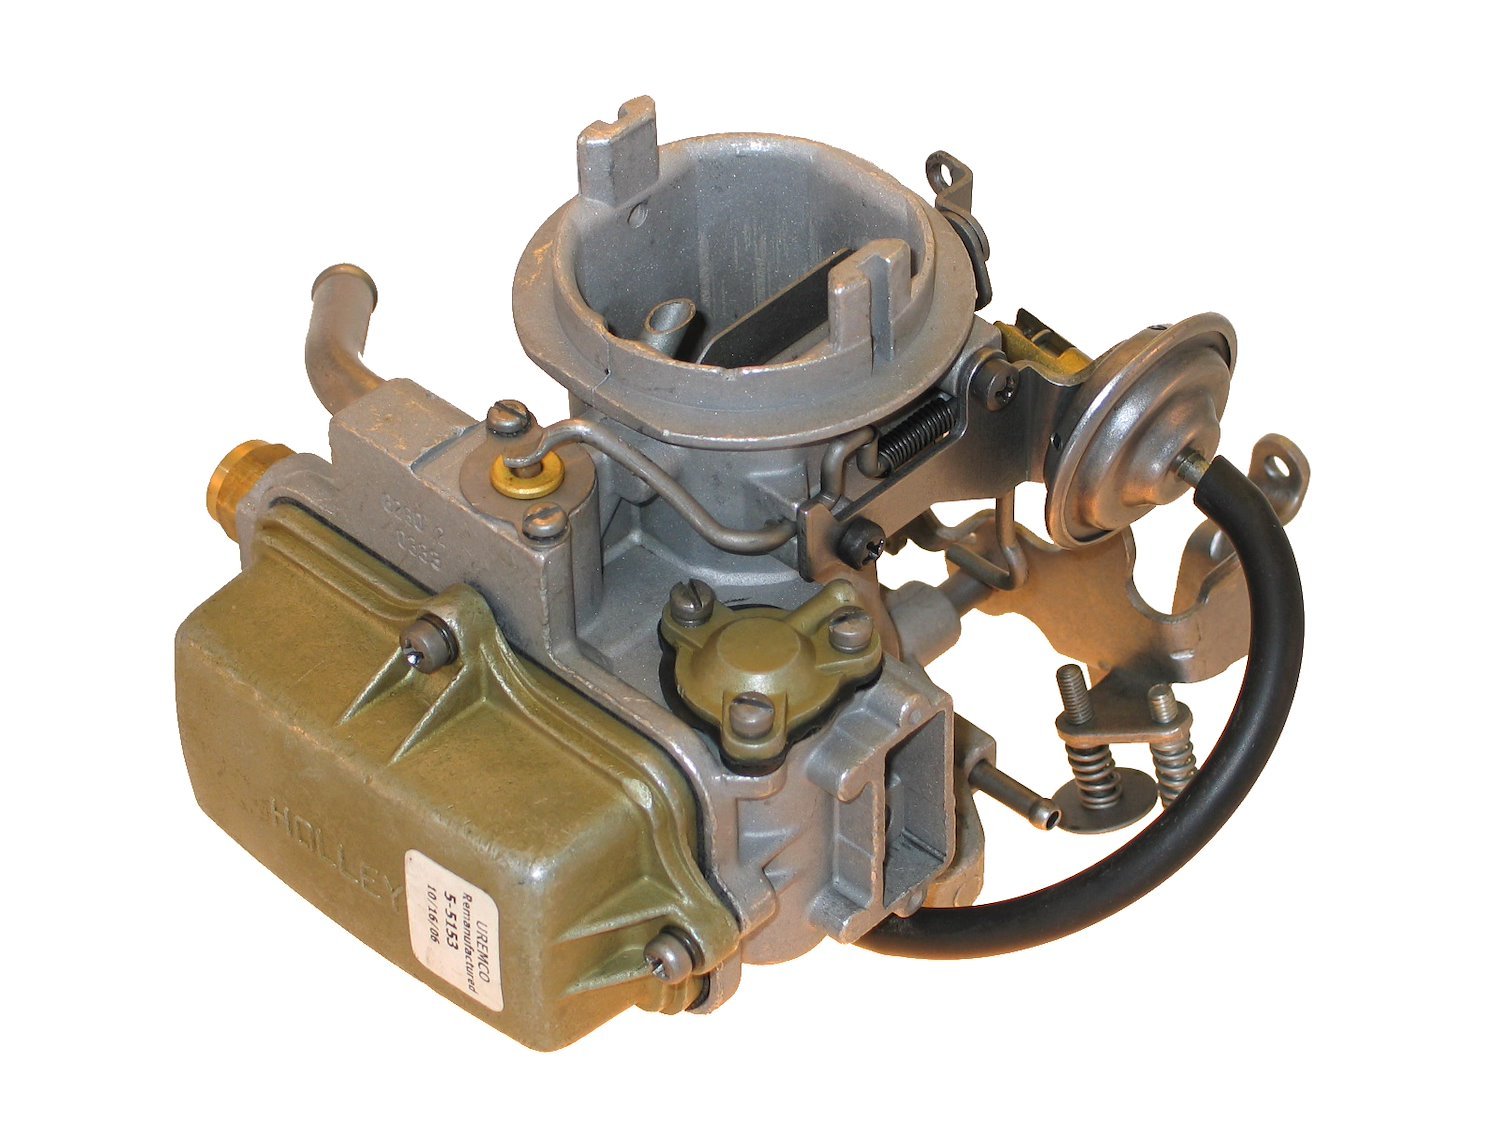 5-5153 Holley Remanufactured Carburetor, 1920-Style